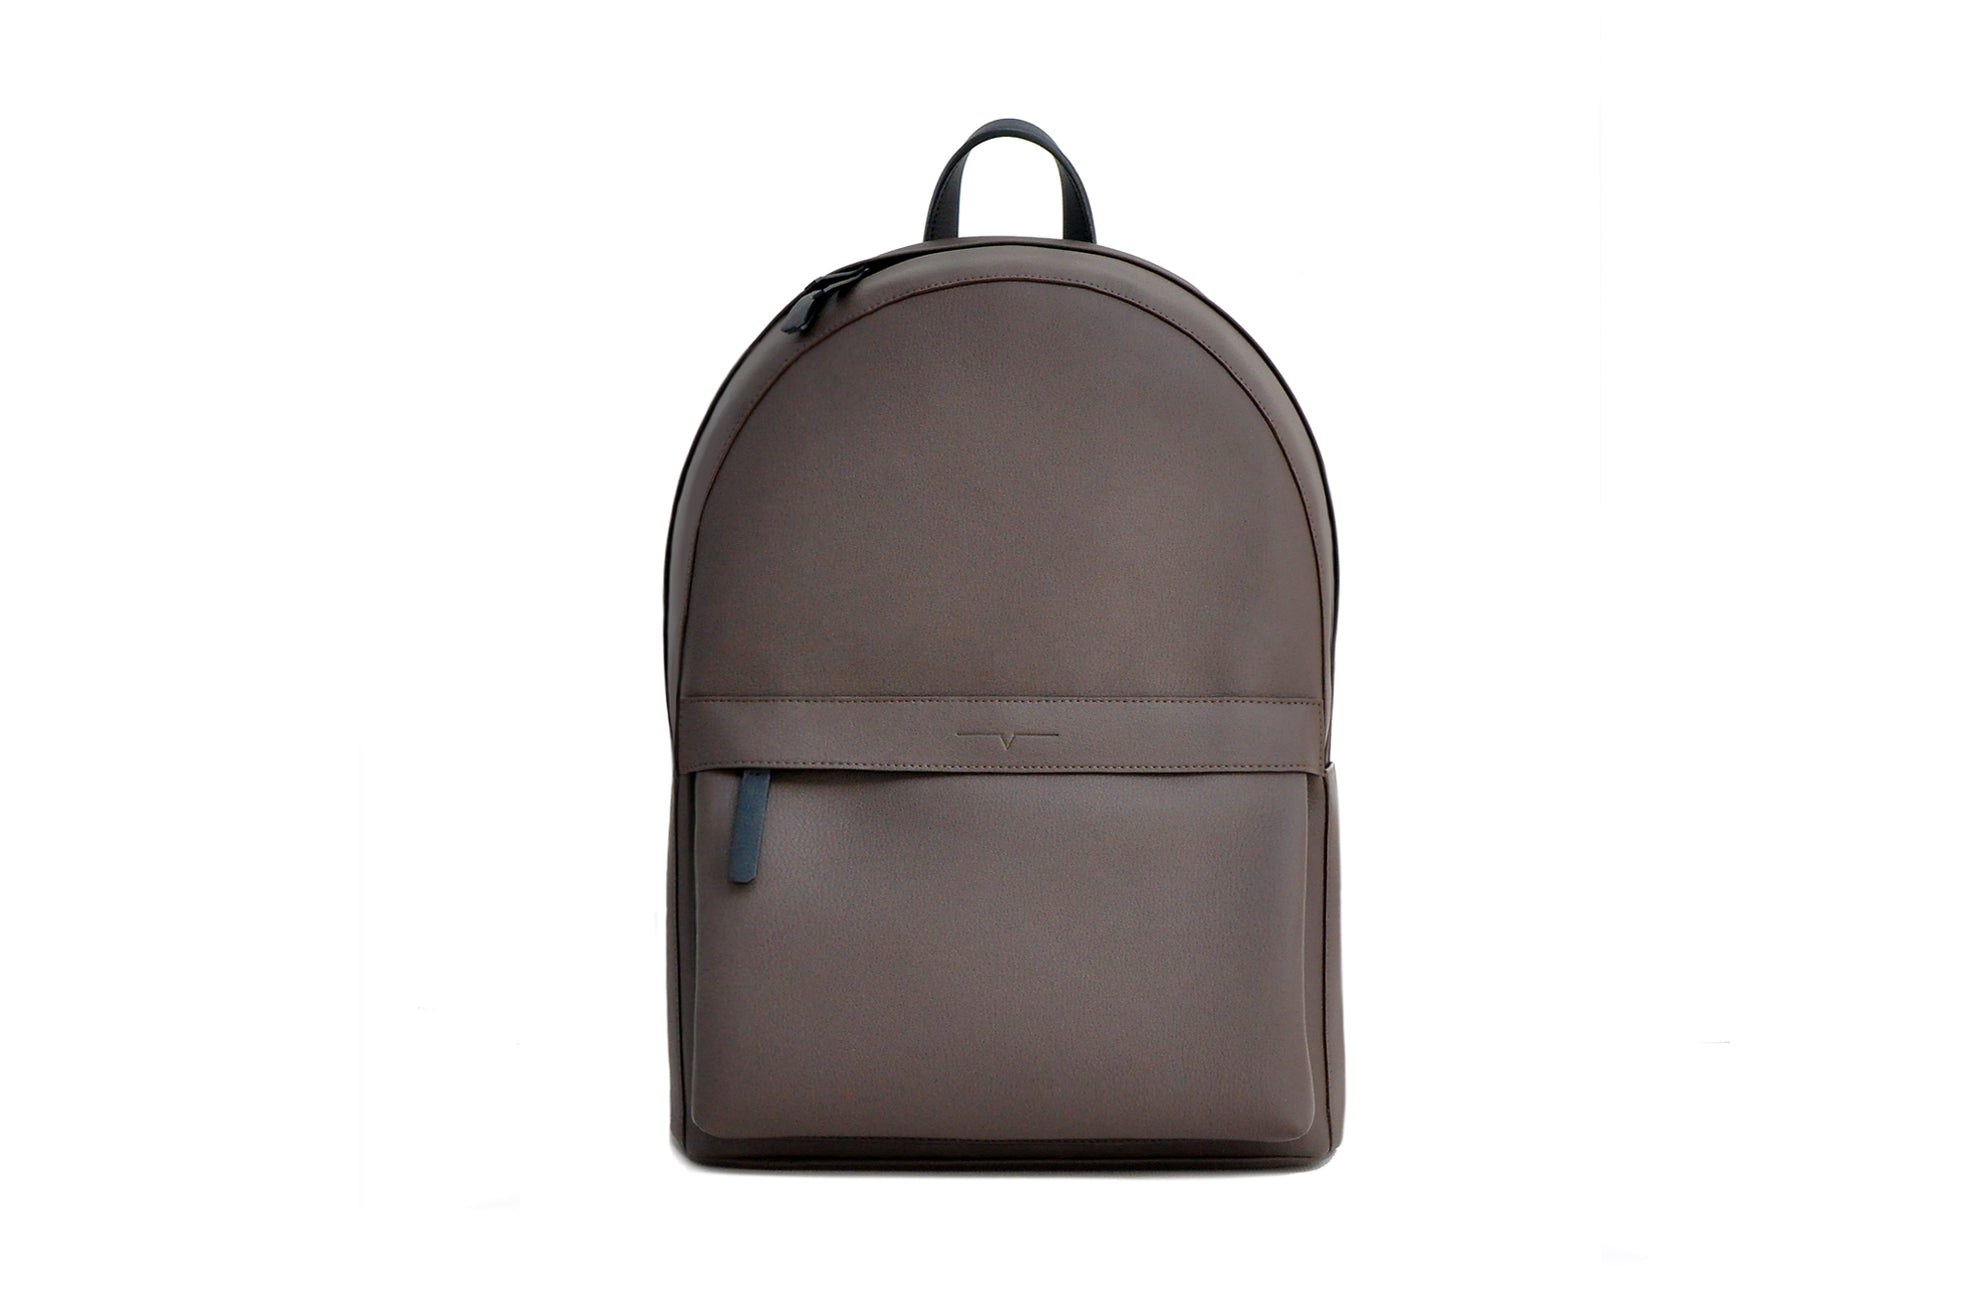 The Classic Backpack in Technik in Taupe and Black image 1